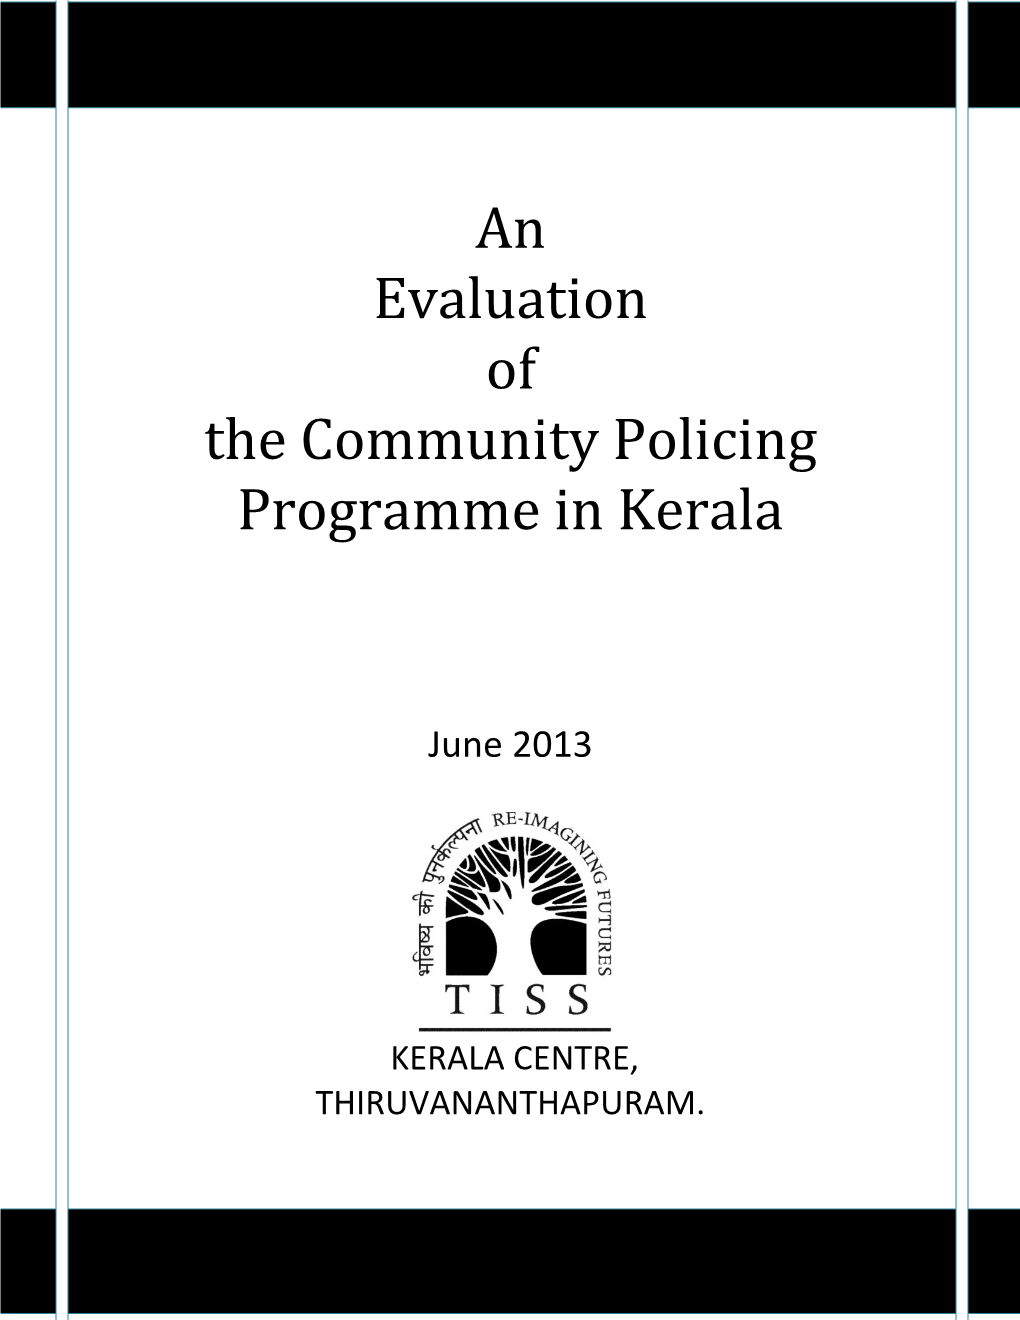 An Evaluation of the Community Policing Programme in Kerala